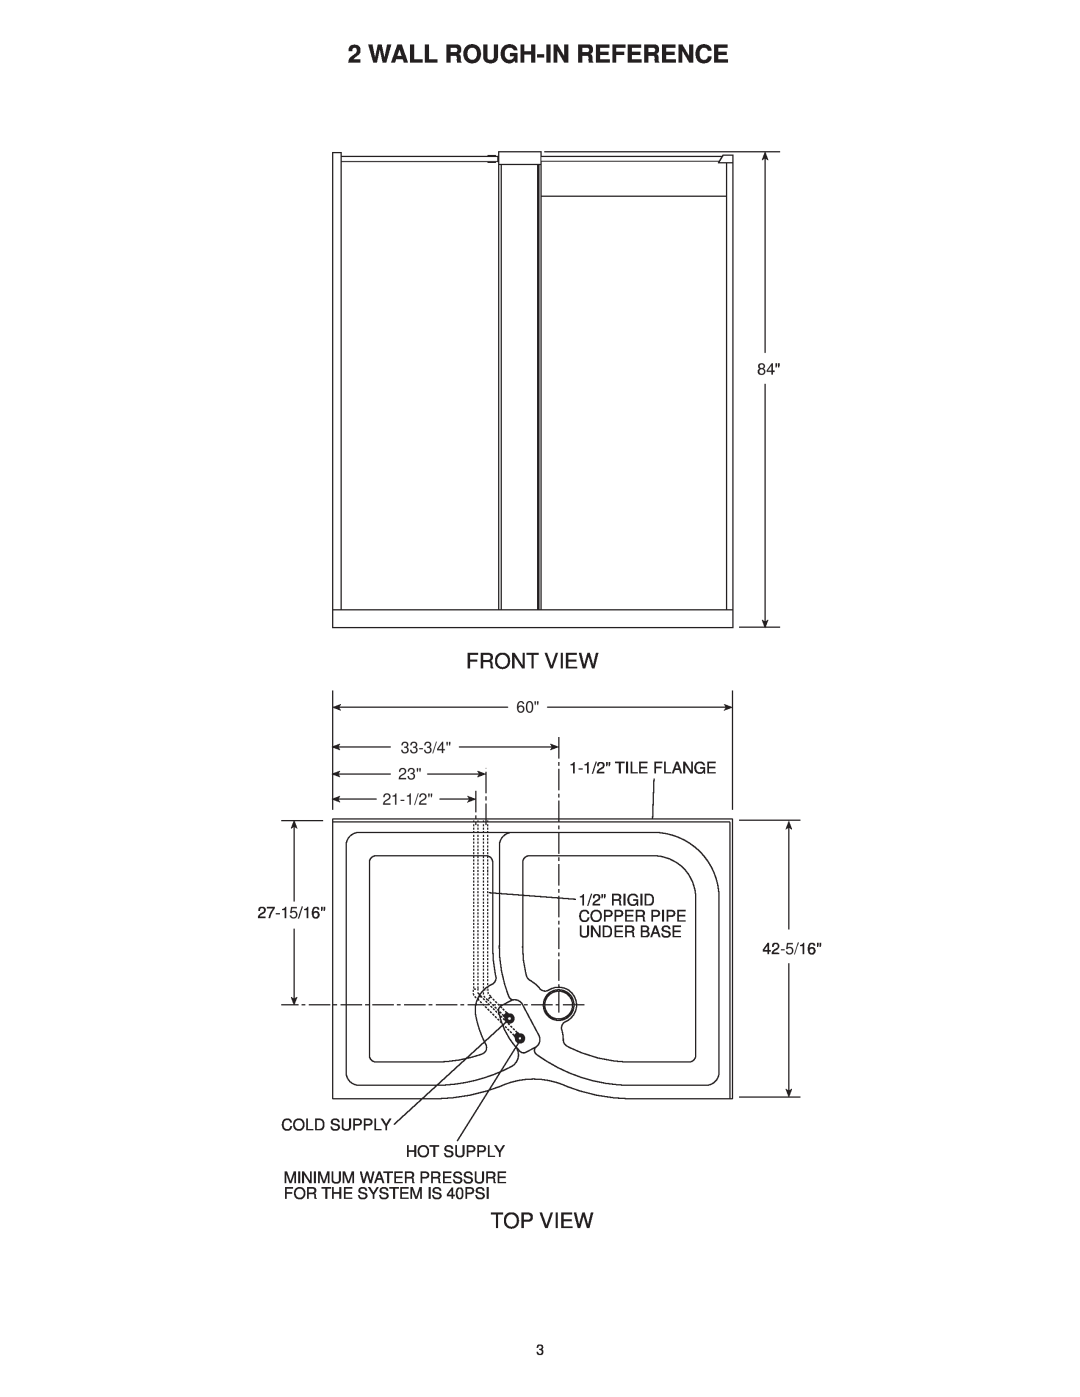 Jacuzzi SUMMER RAINTM 2 WALL & 3 WALL WALK-IN SHOWER SYSTEMS Wall Rough-In Reference, Front View, Top View, 33-3/4, 21-1/2 